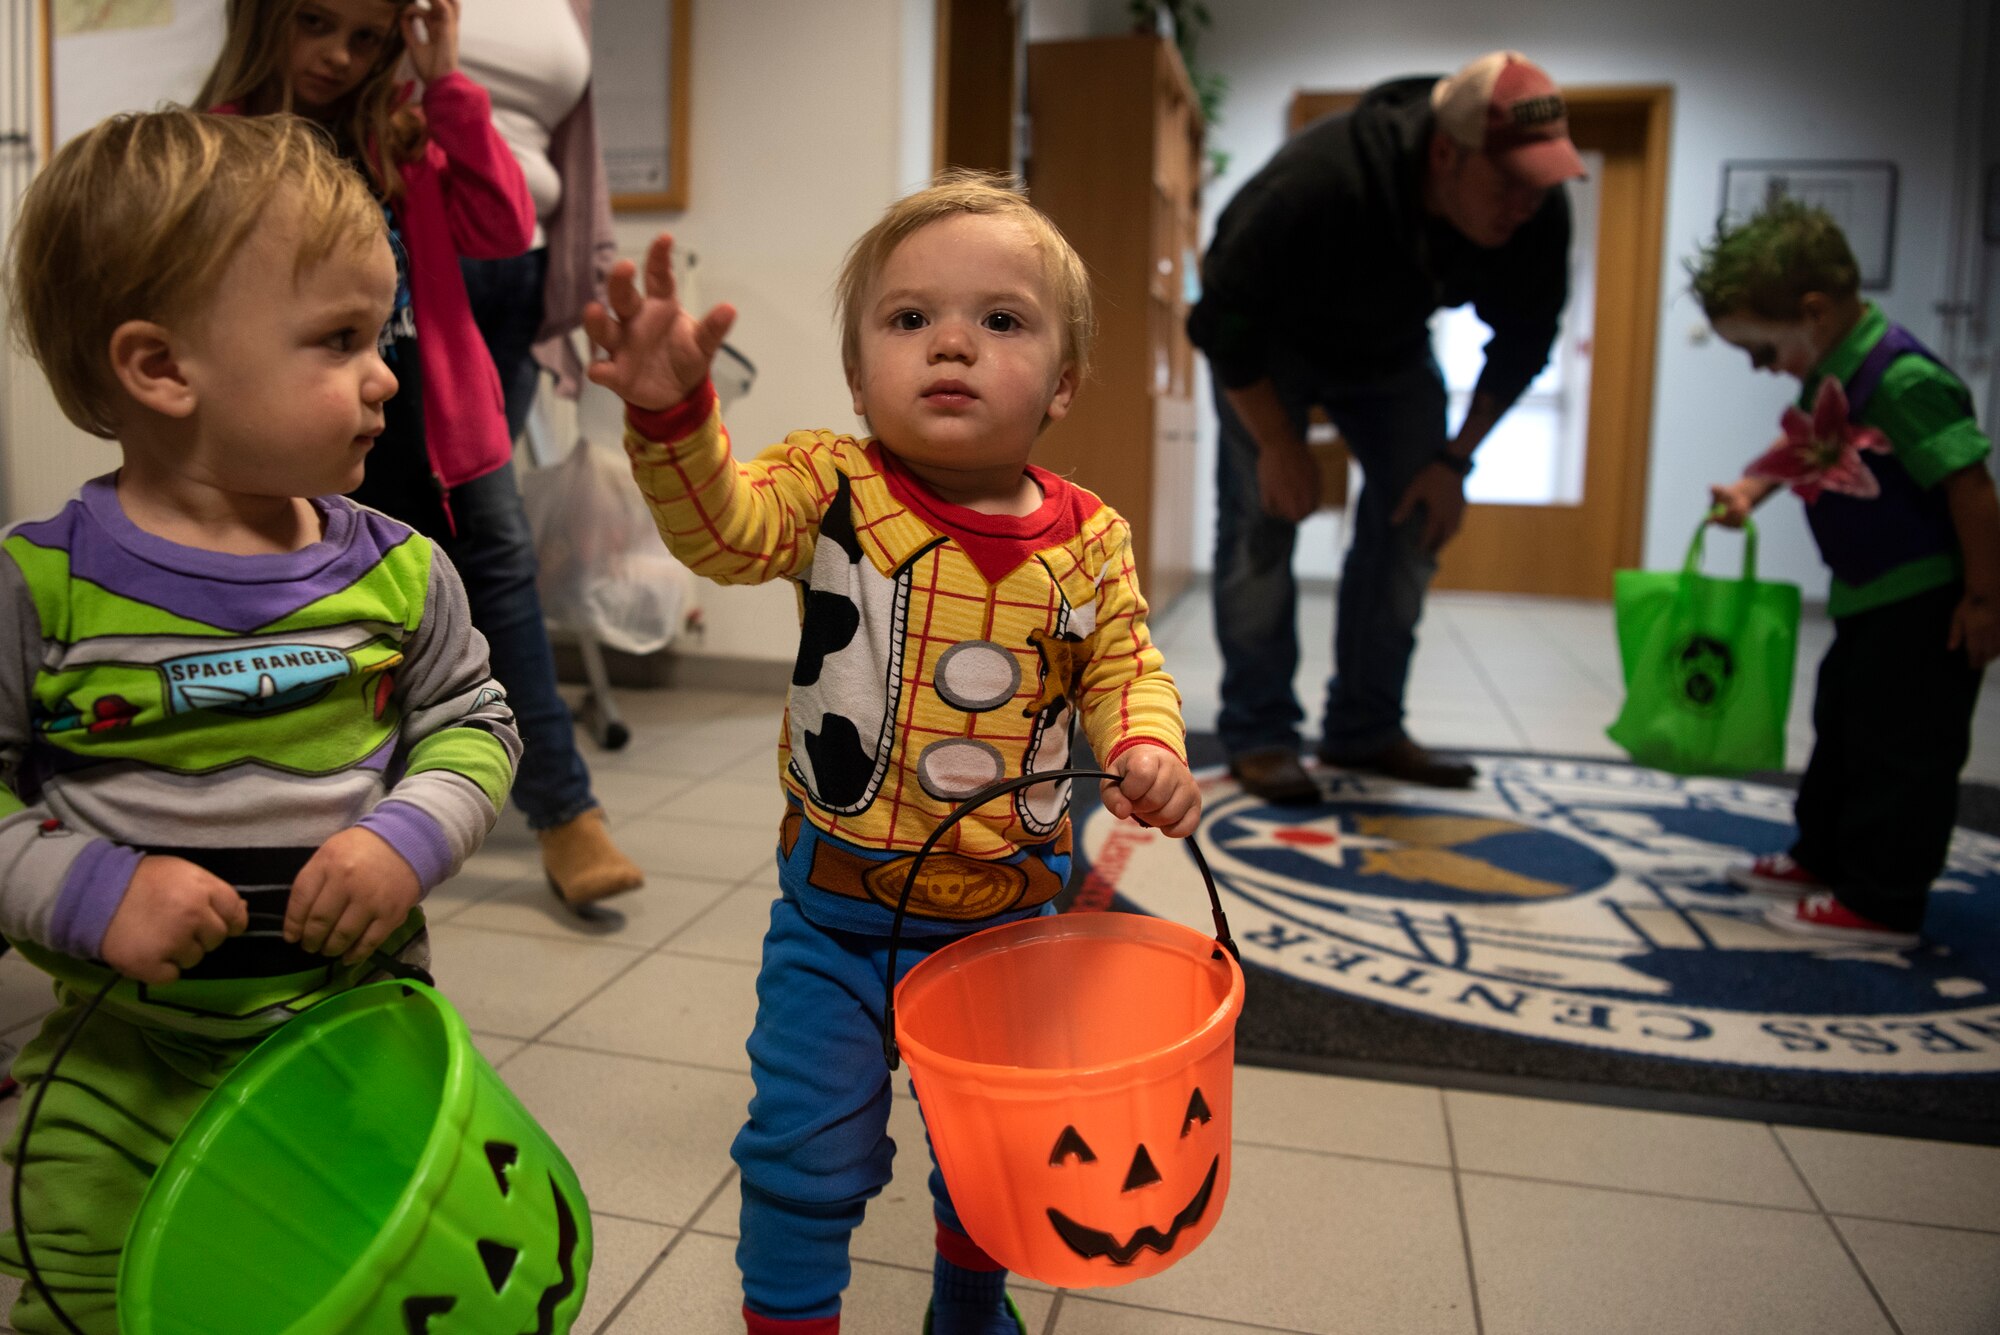 Spangdahlem Air Base families prepare to trick-or-treat in the Airman and Family Readiness Center during a deployed-family event at Spangdahlem AB, Germany, Oct. 17, 2019. The center hosts monthly events to support families affected by deployments or short tours. (U.S. Air Force photo by Airman 1st Class Valerie Seelye)